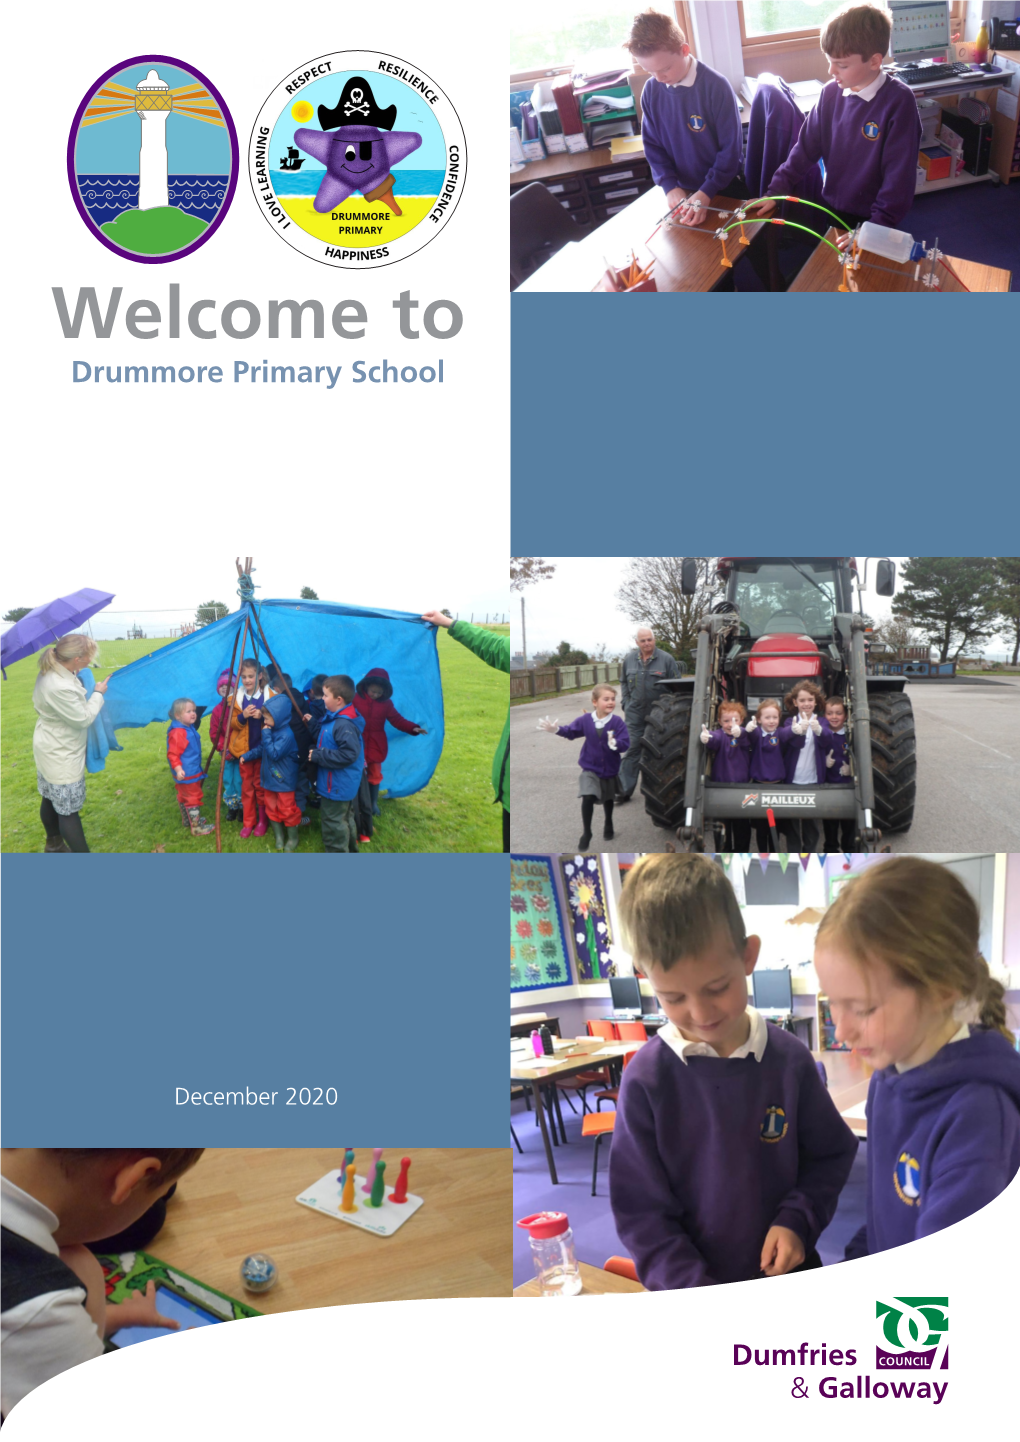 Welcome to Drummore Primary School